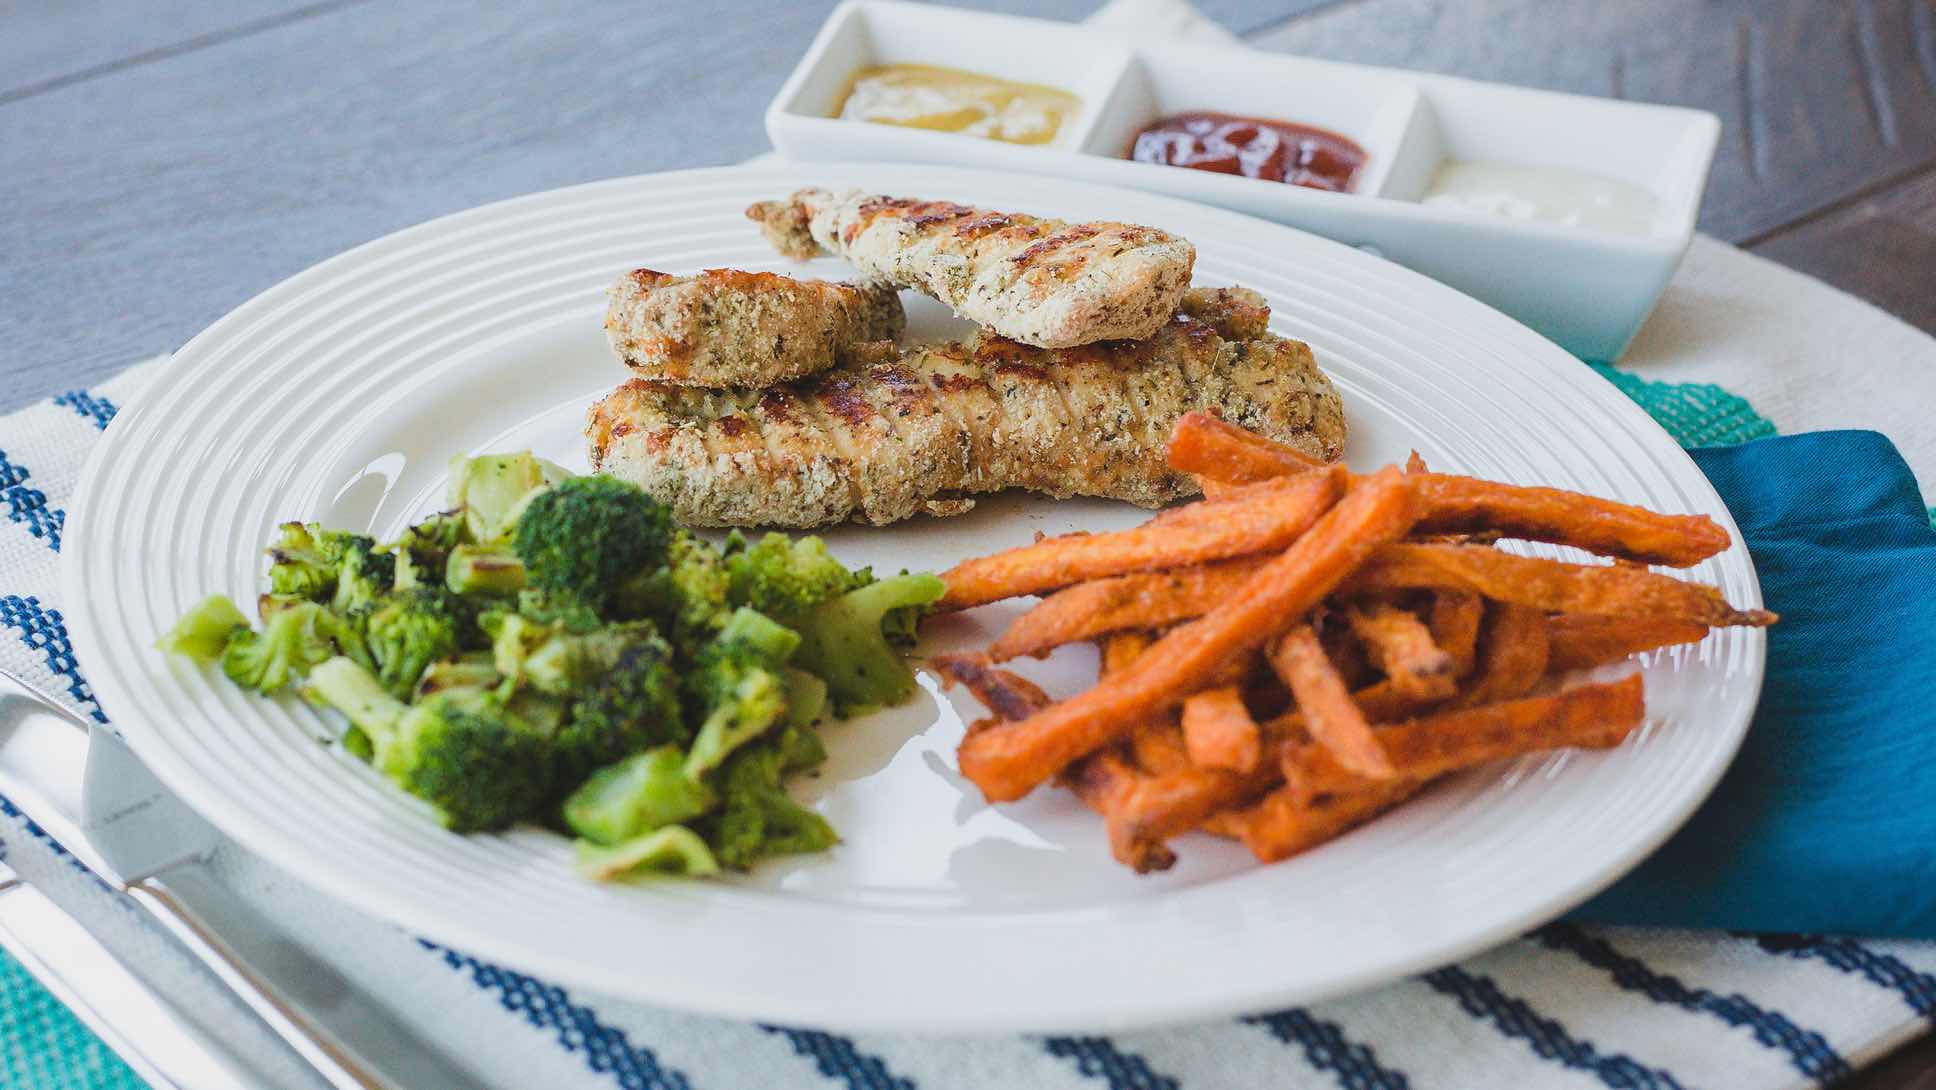 Chicken tenders, broccoli and sweet potato fries on a platet